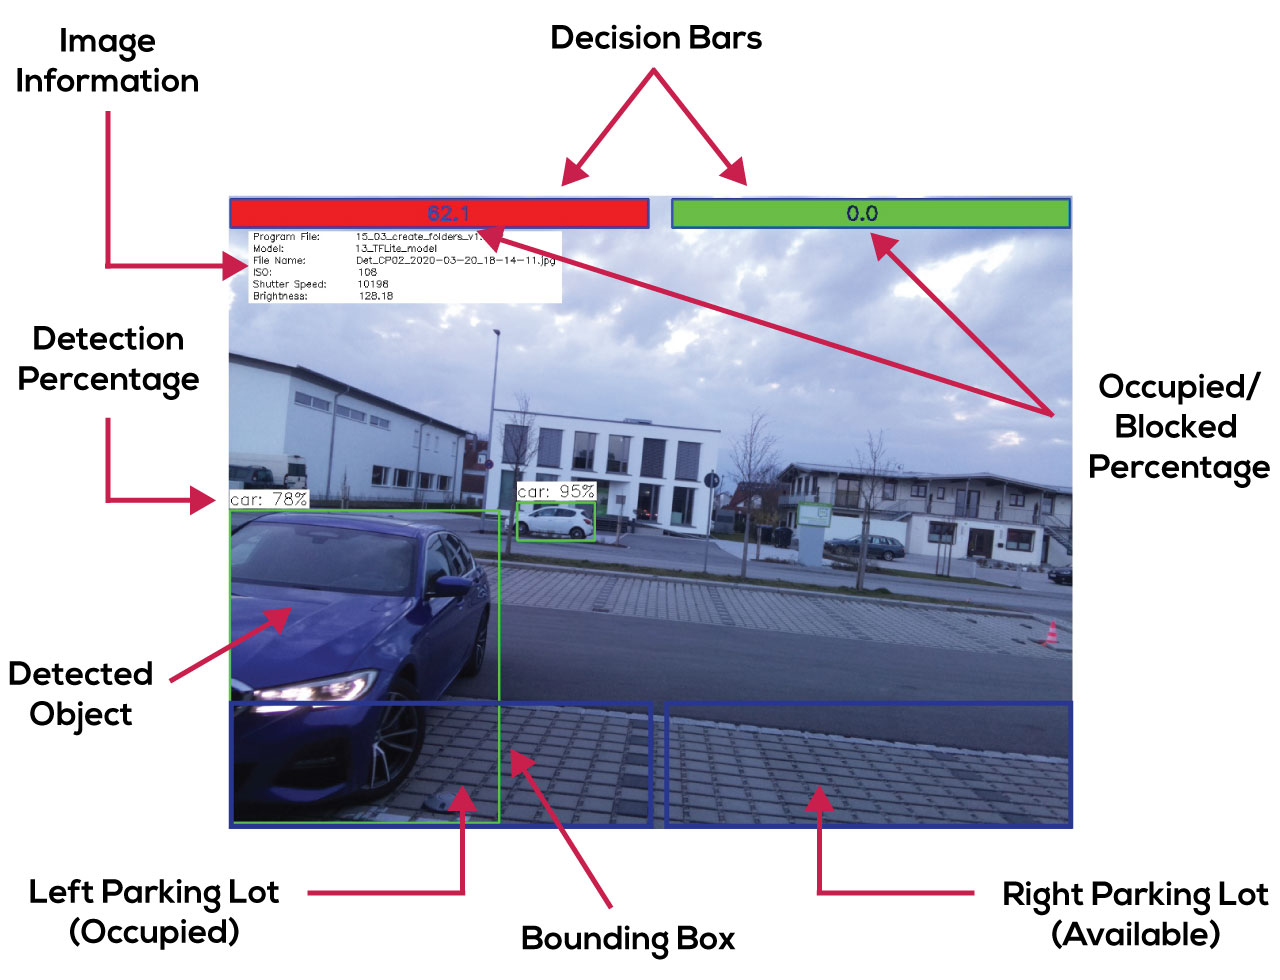 A man in front of a car is scanned by an AI surveillance camera.